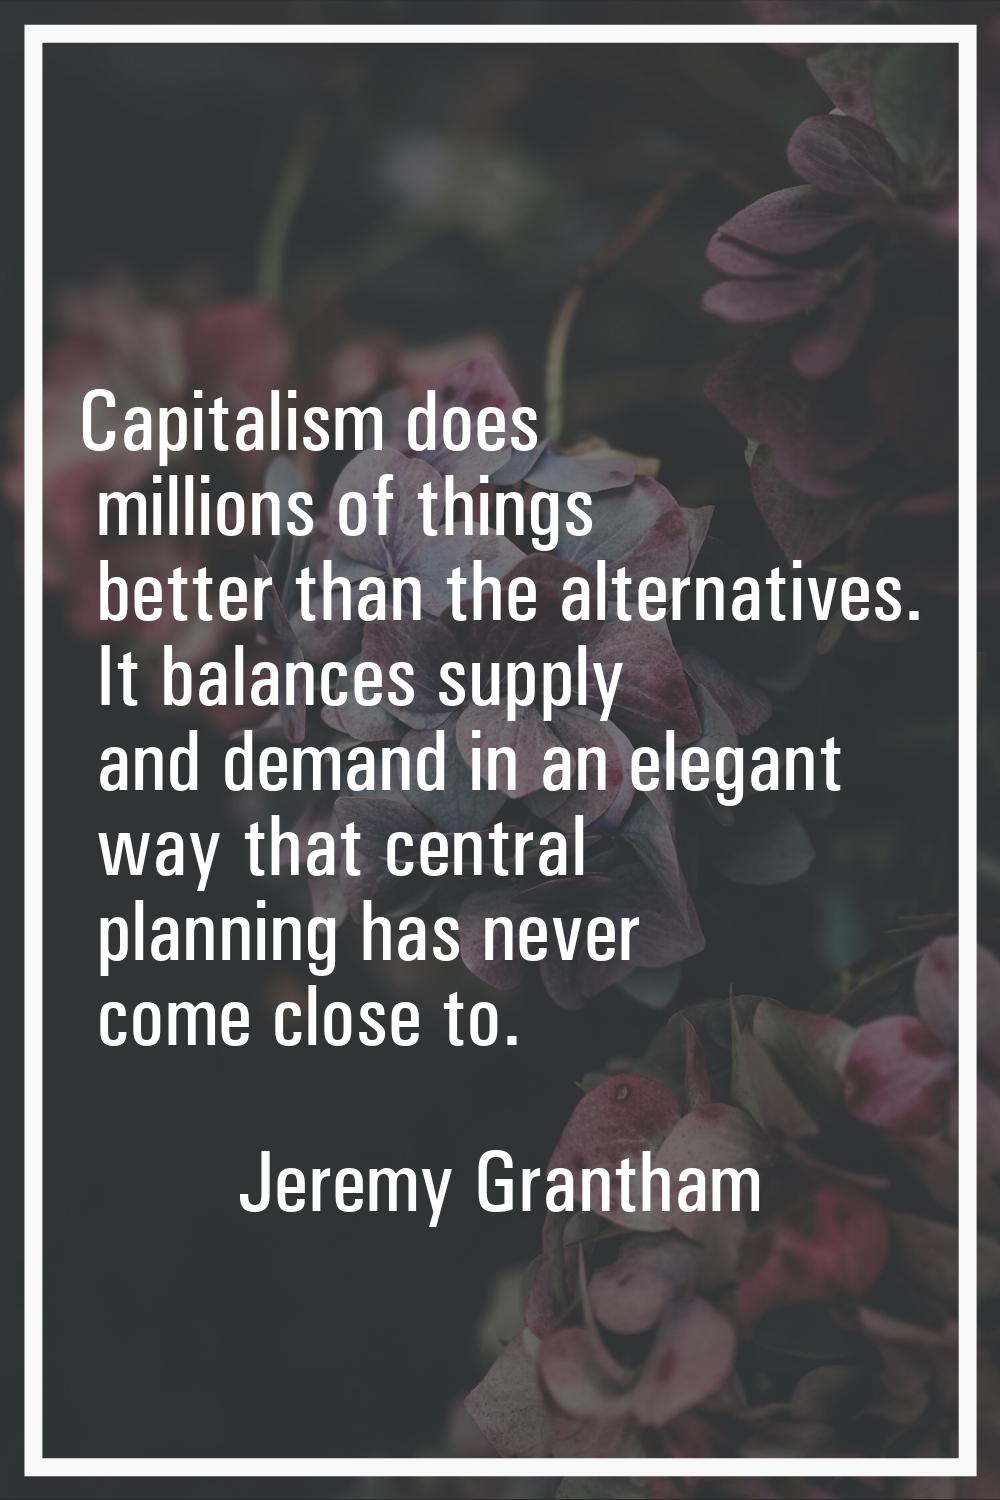 Capitalism does millions of things better than the alternatives. It balances supply and demand in a